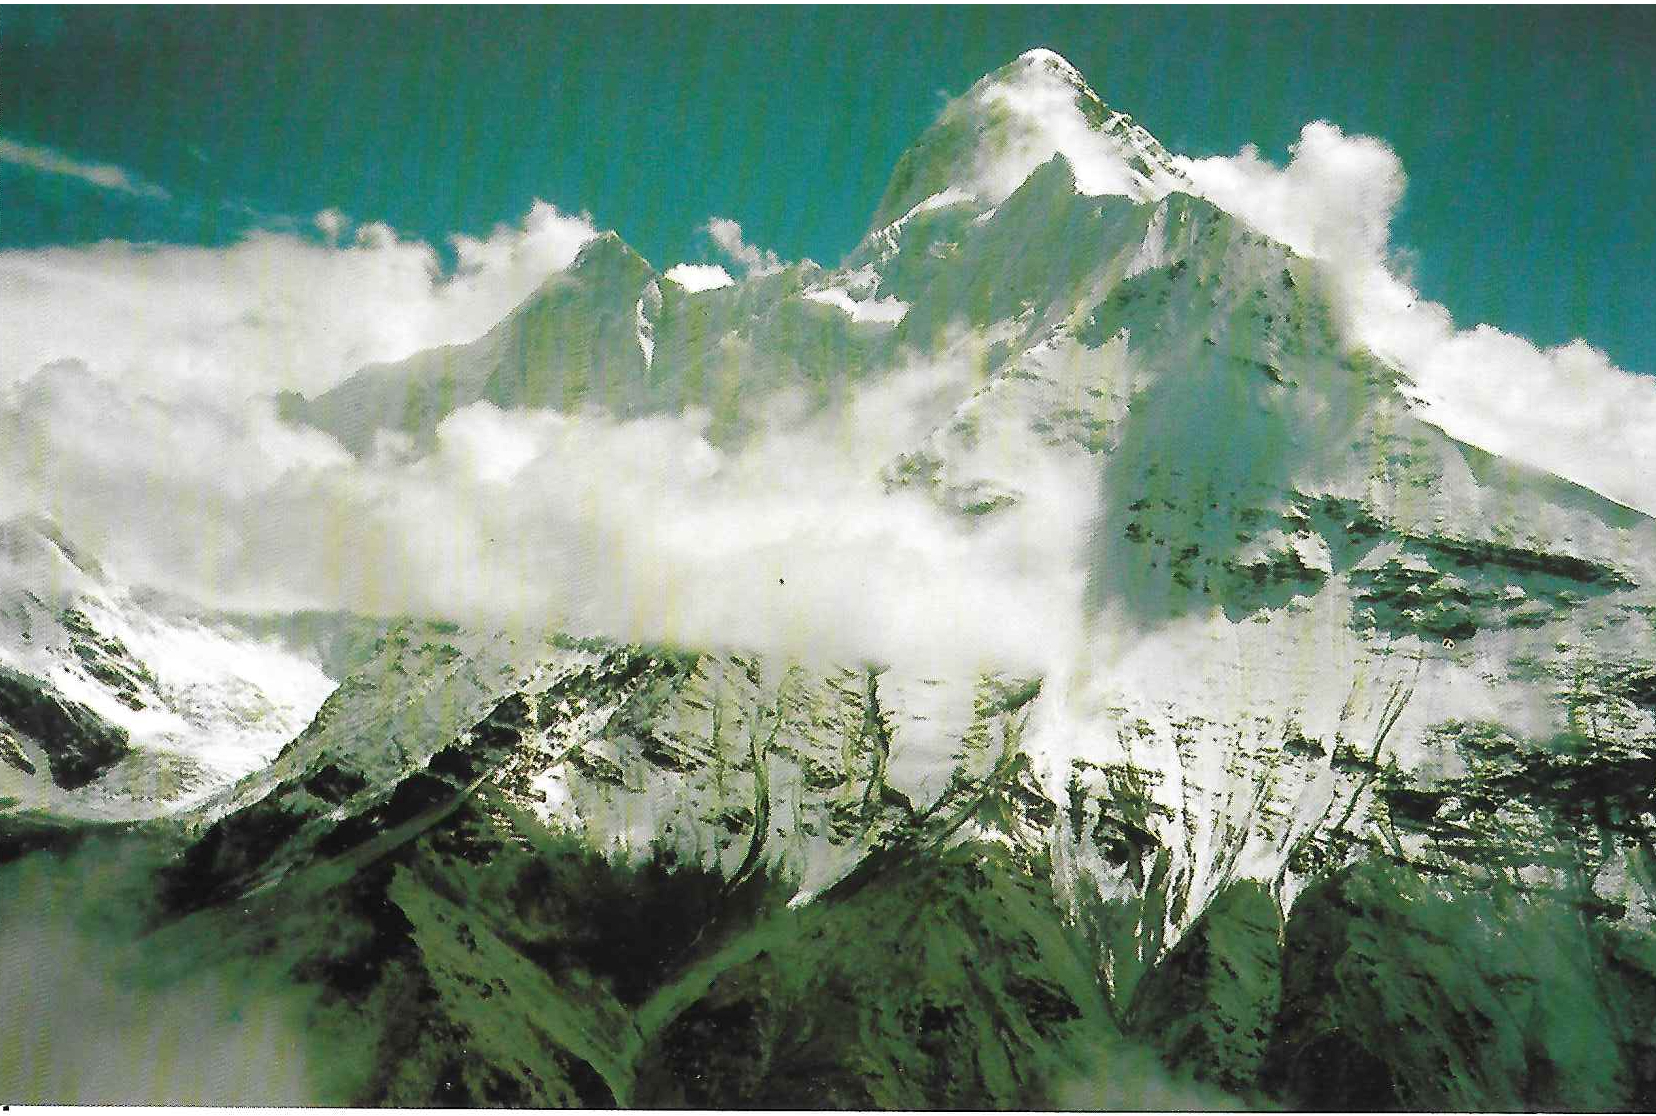 Nanda_Devi_from_within_the_Sanctuary.jpg